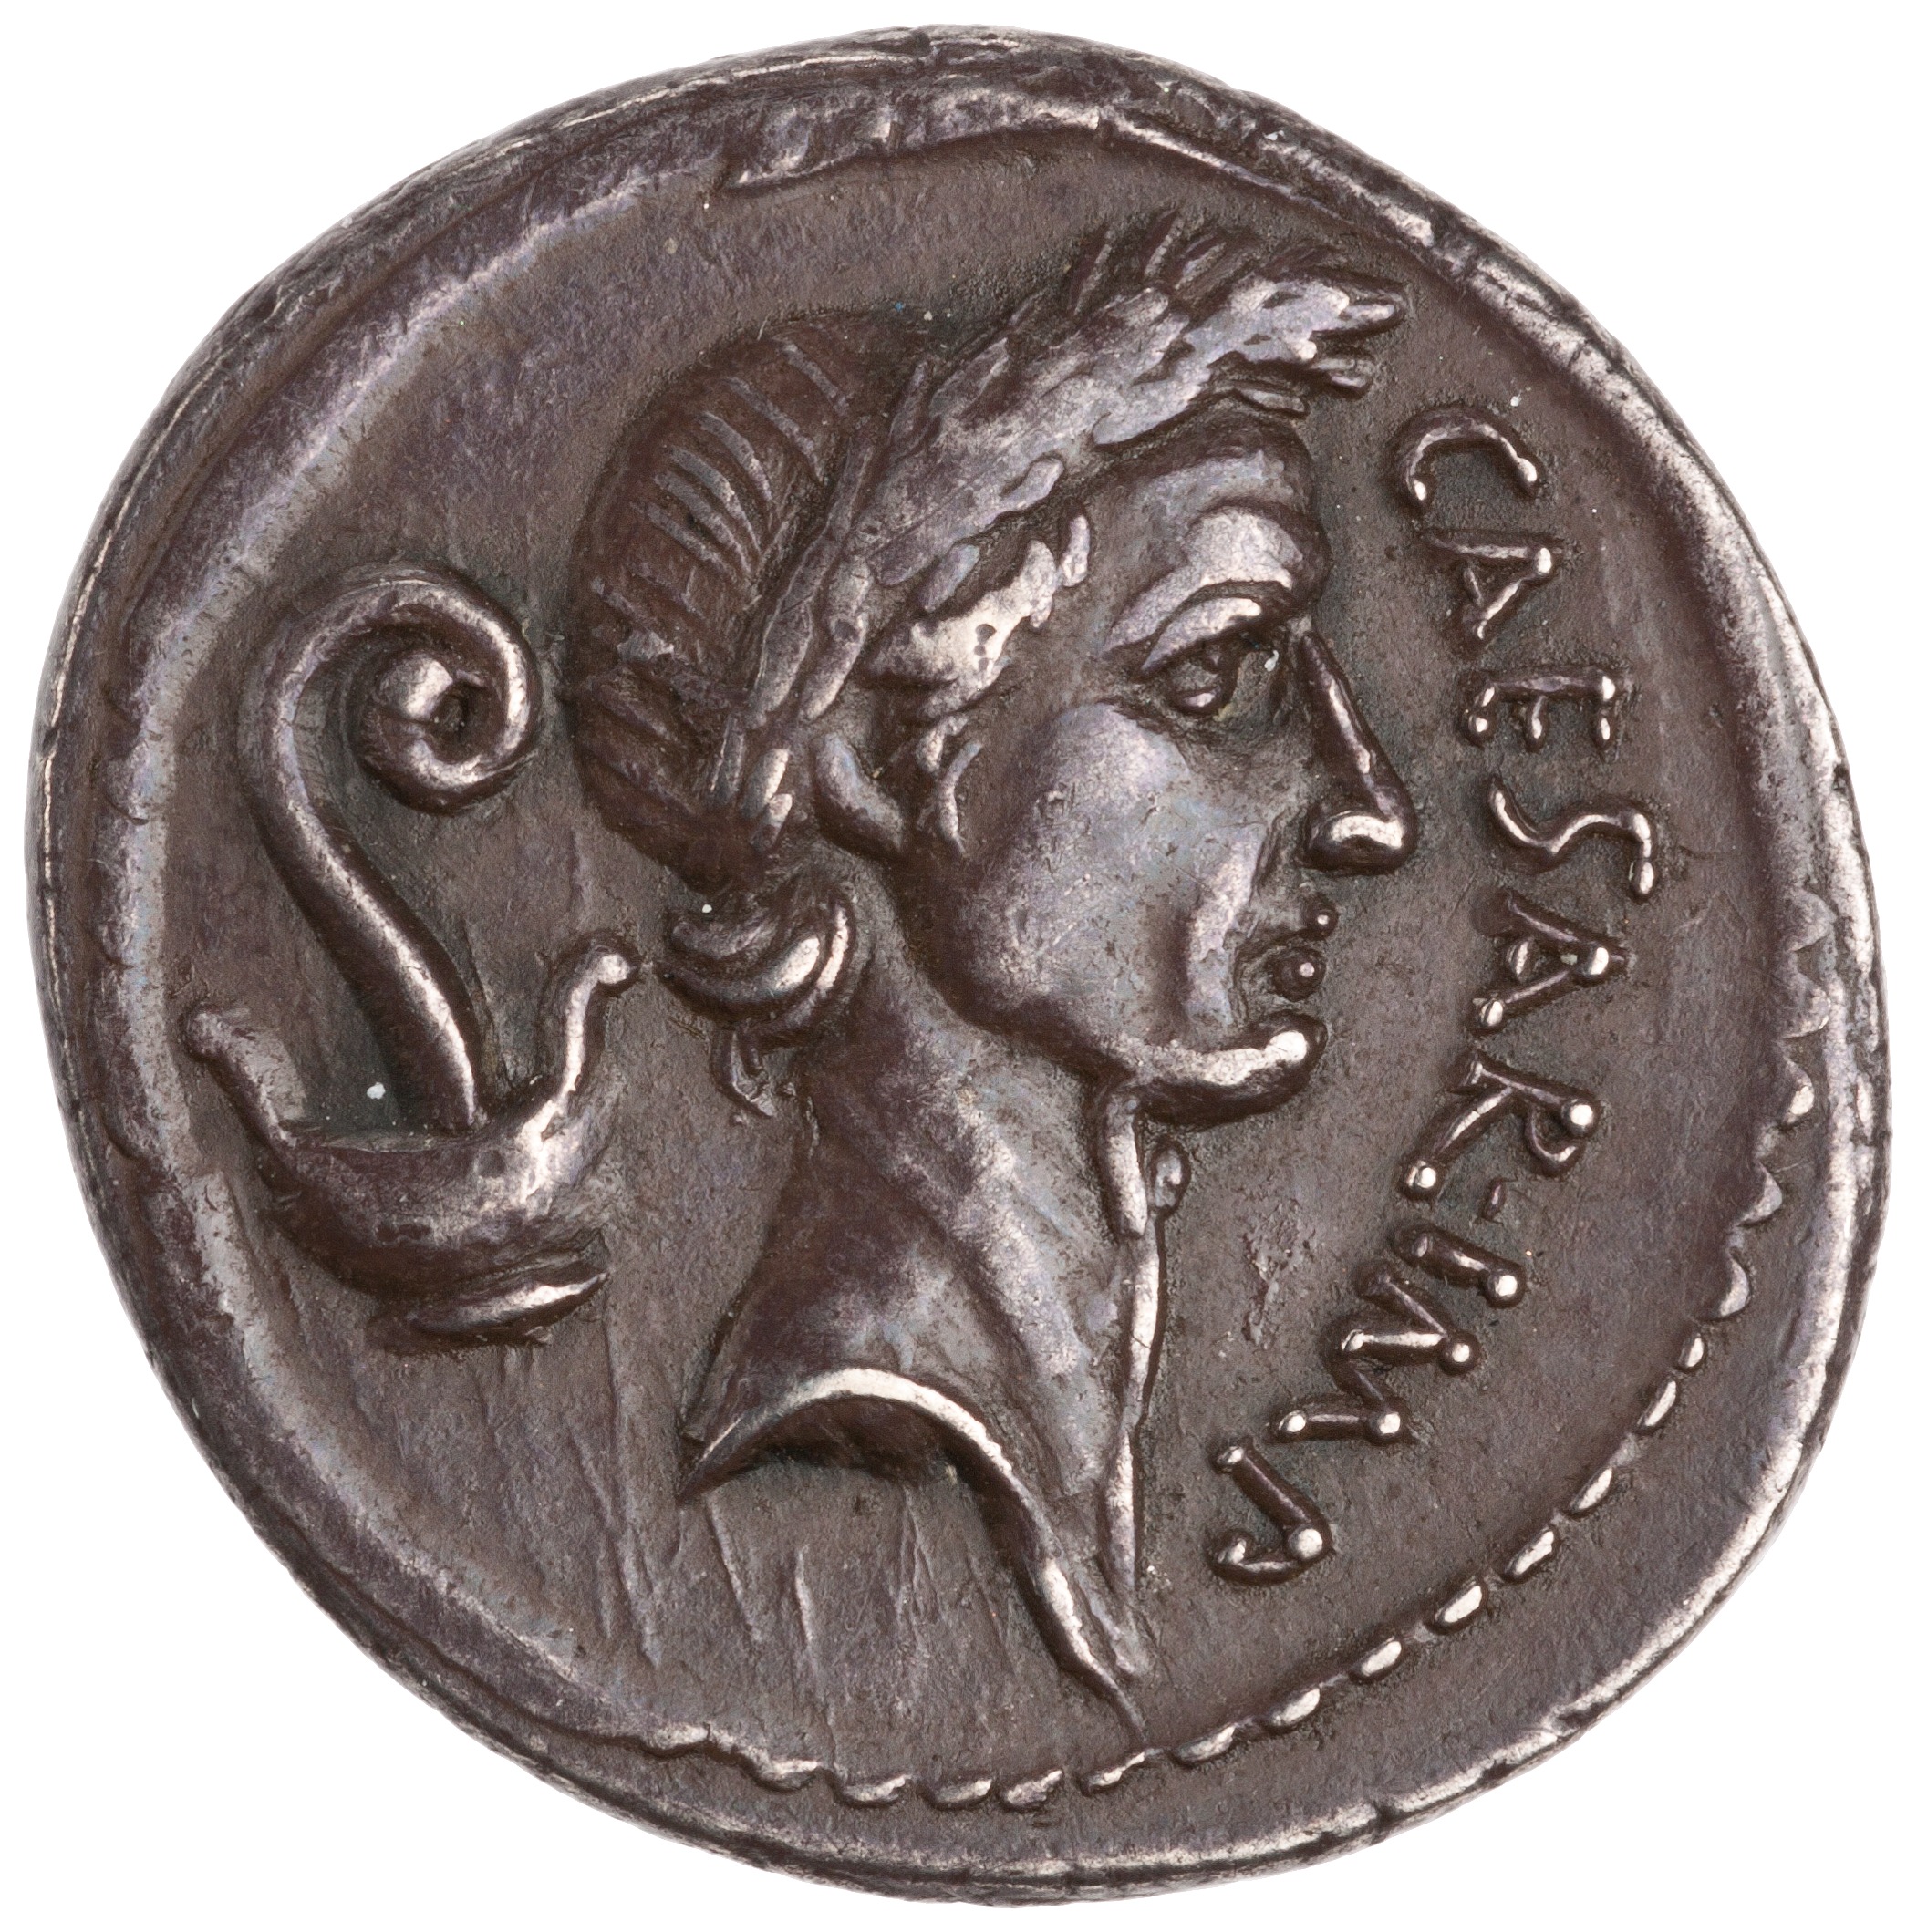 Destruction of Emperors' Images on Roman Coins from the ANS...